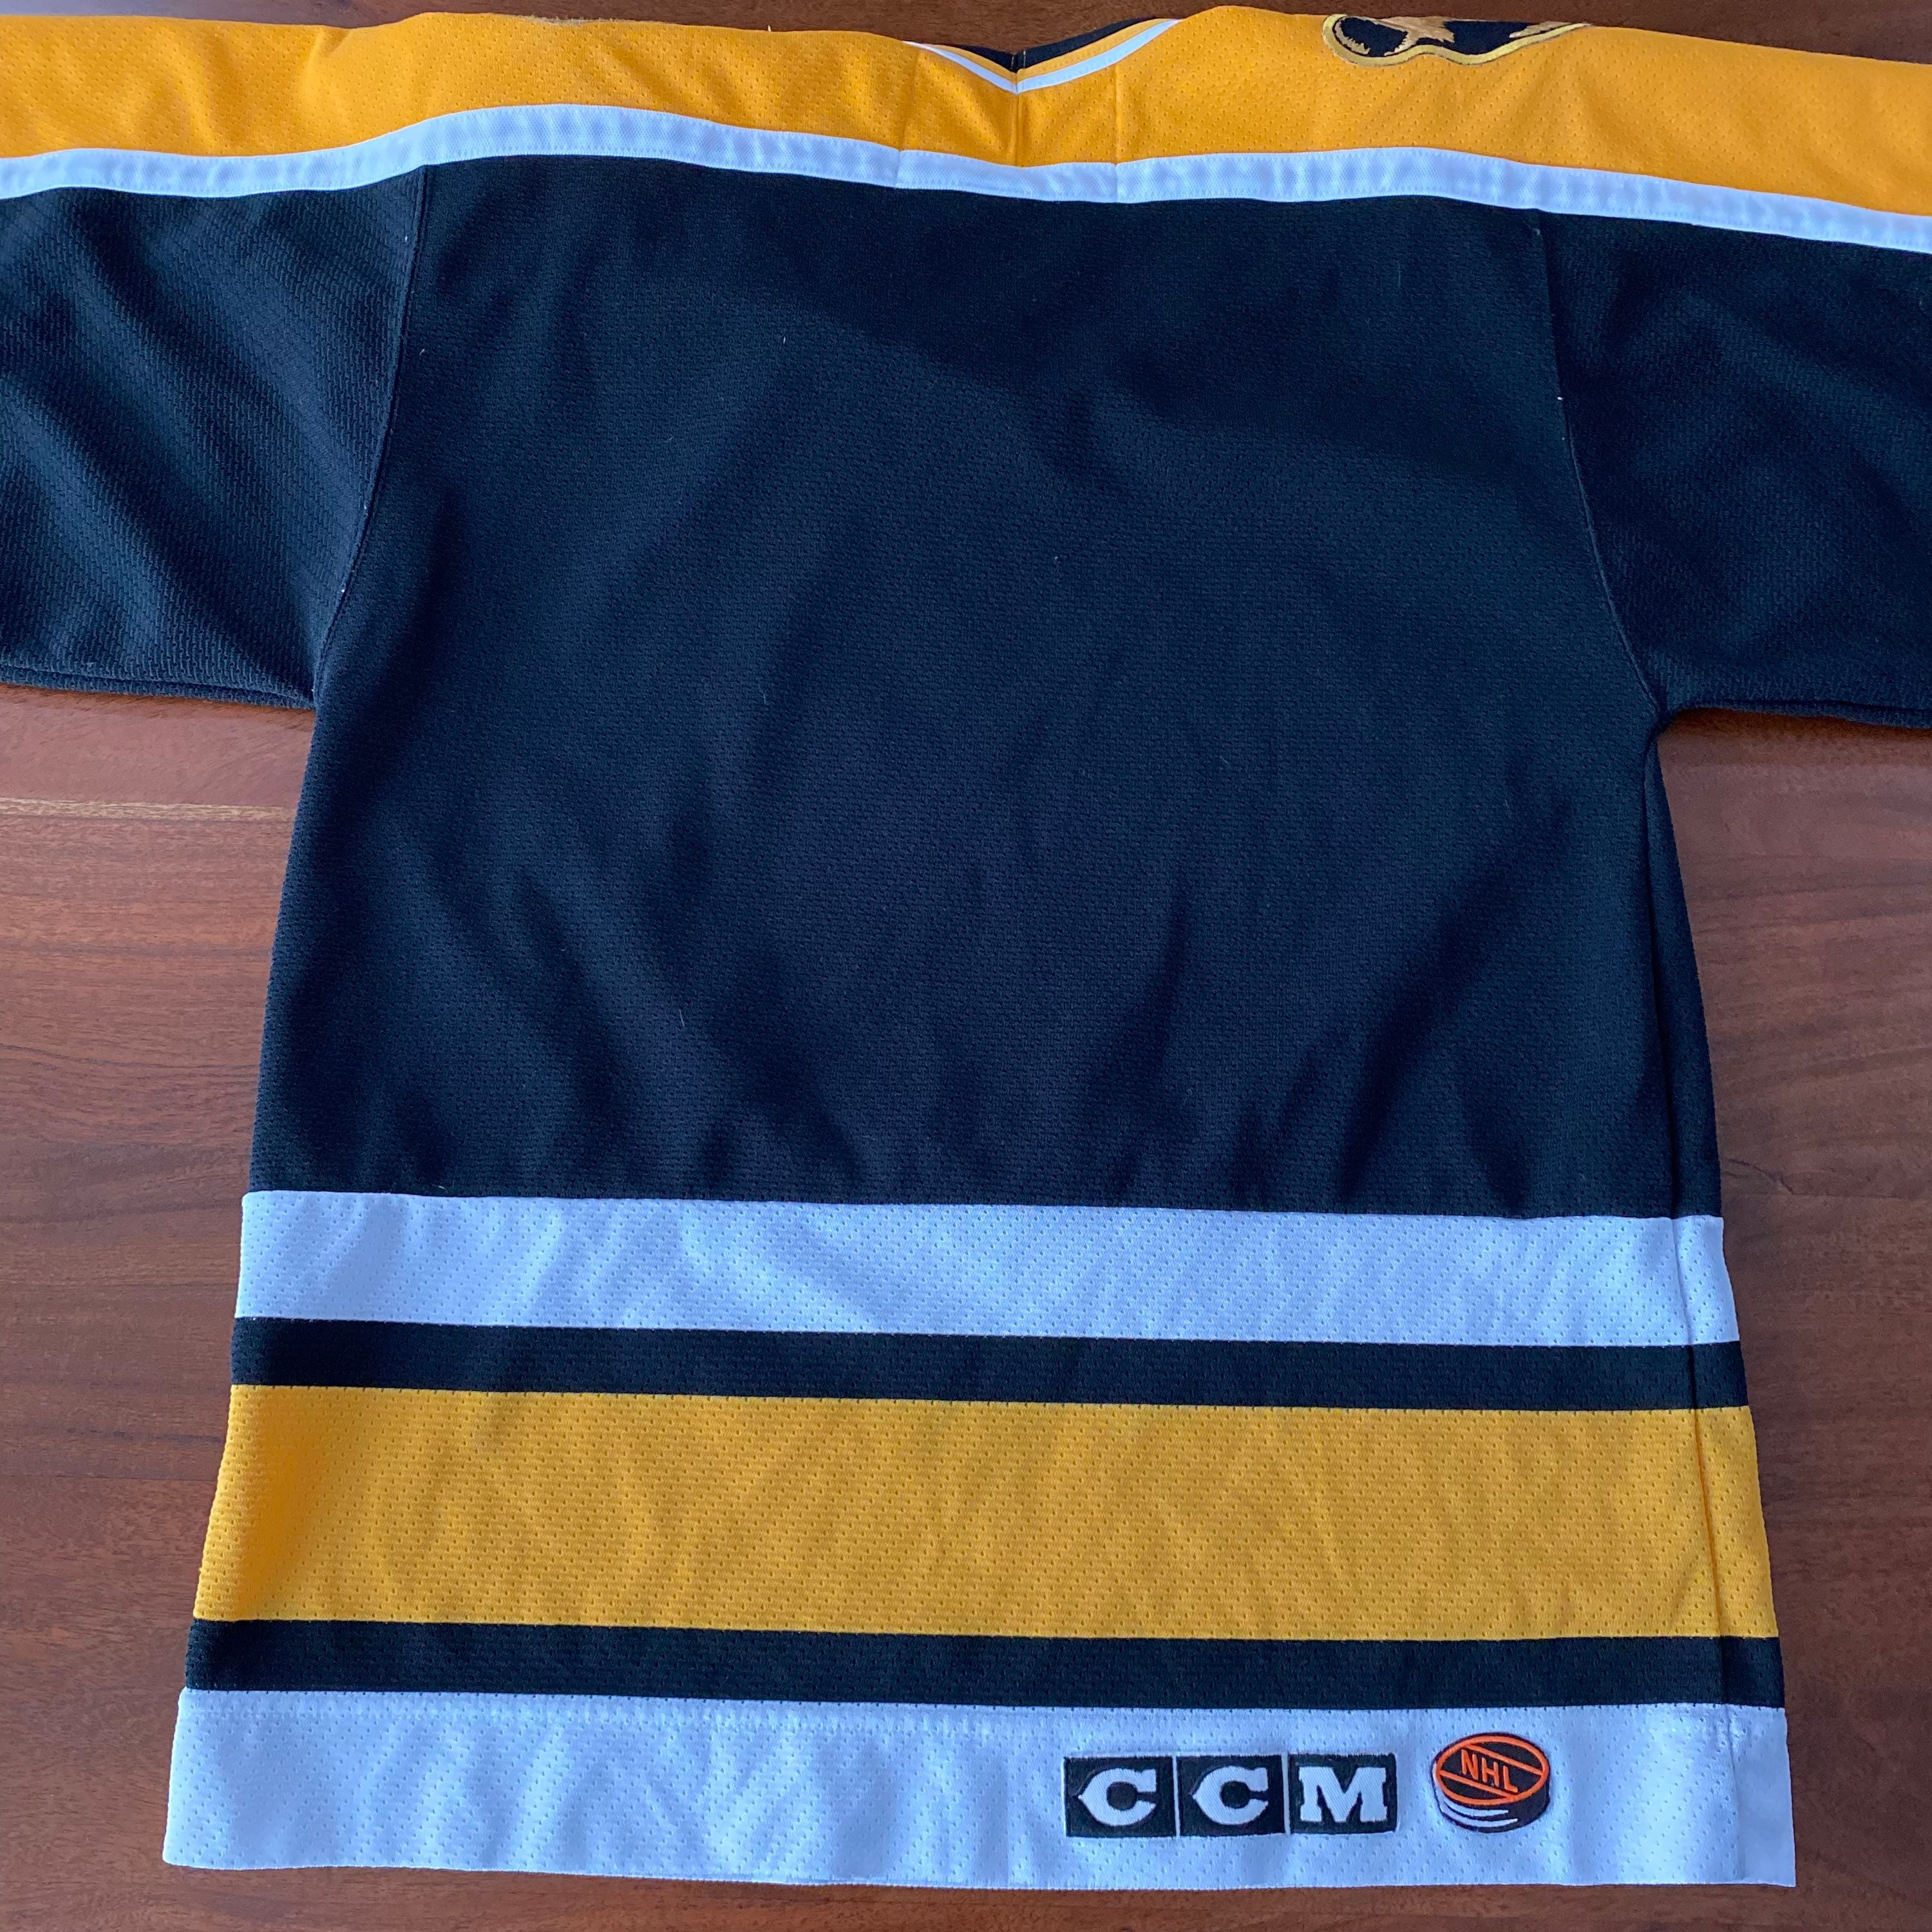 Boston Bruins white jersey appreciation post. 90s home and TBTC are Center  Ice Collection. Current away and Winter Classic are Made in Canada.  Bergeron on the right is CCM Vintage series. 